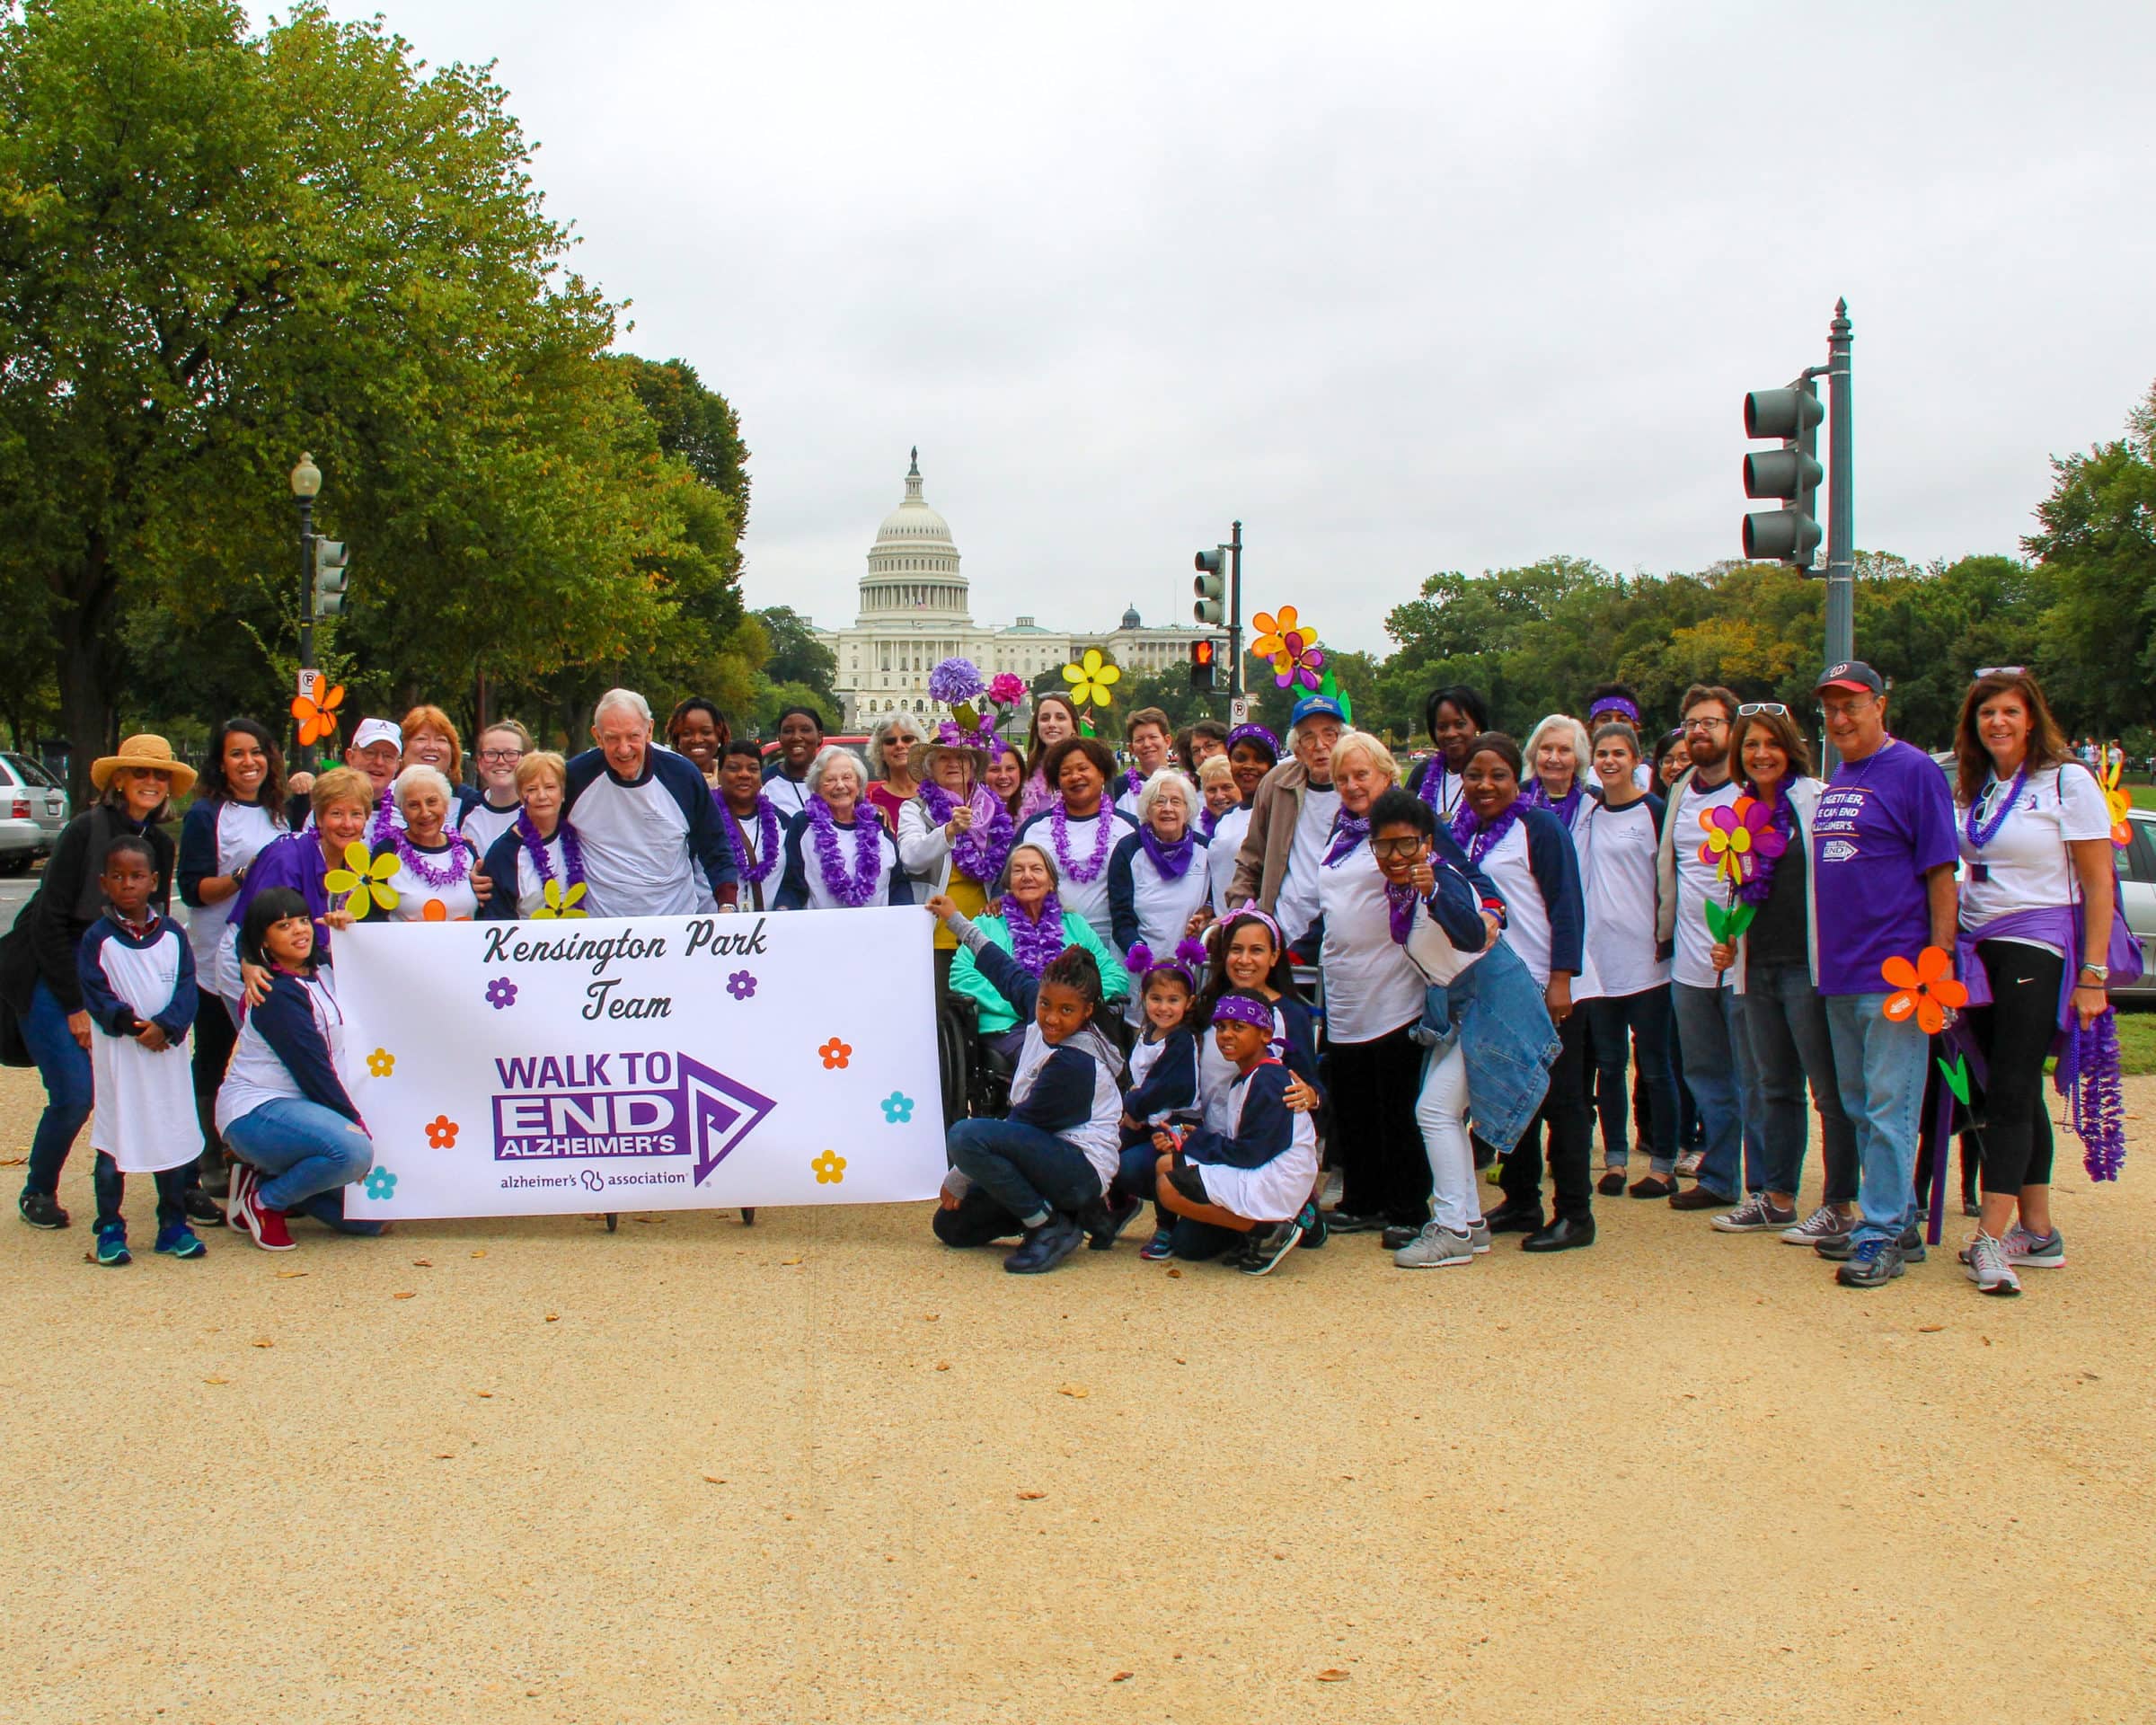 Team KP joins the Walk to End Alzheimers in Washington DC with memory care residents